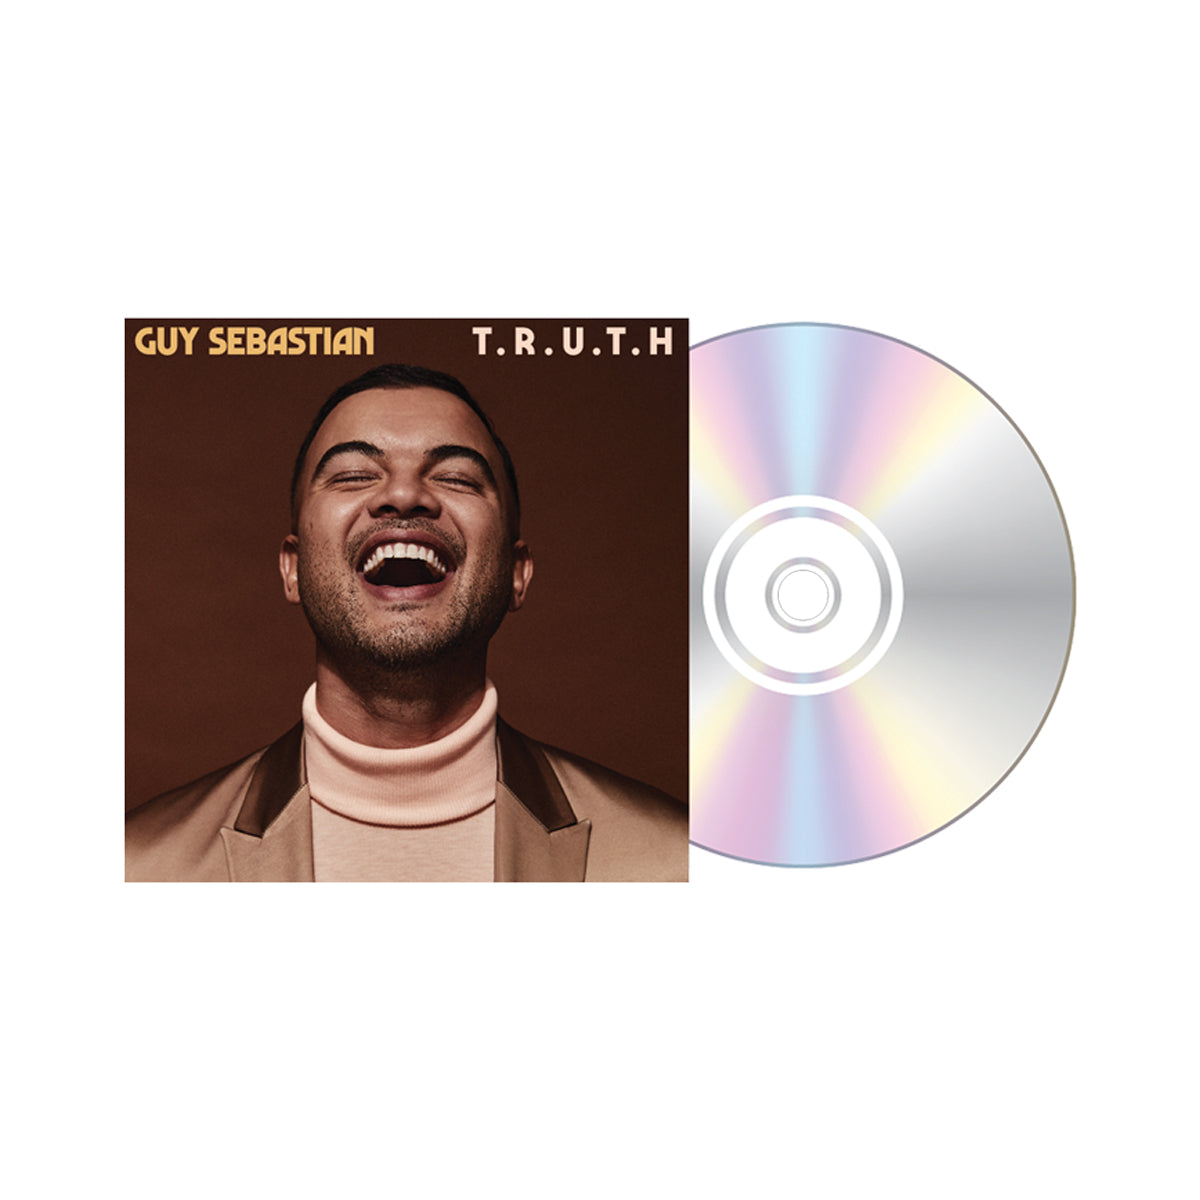 Guy Sebastian TRUTH album cover, with CD disc coming out of sleeve